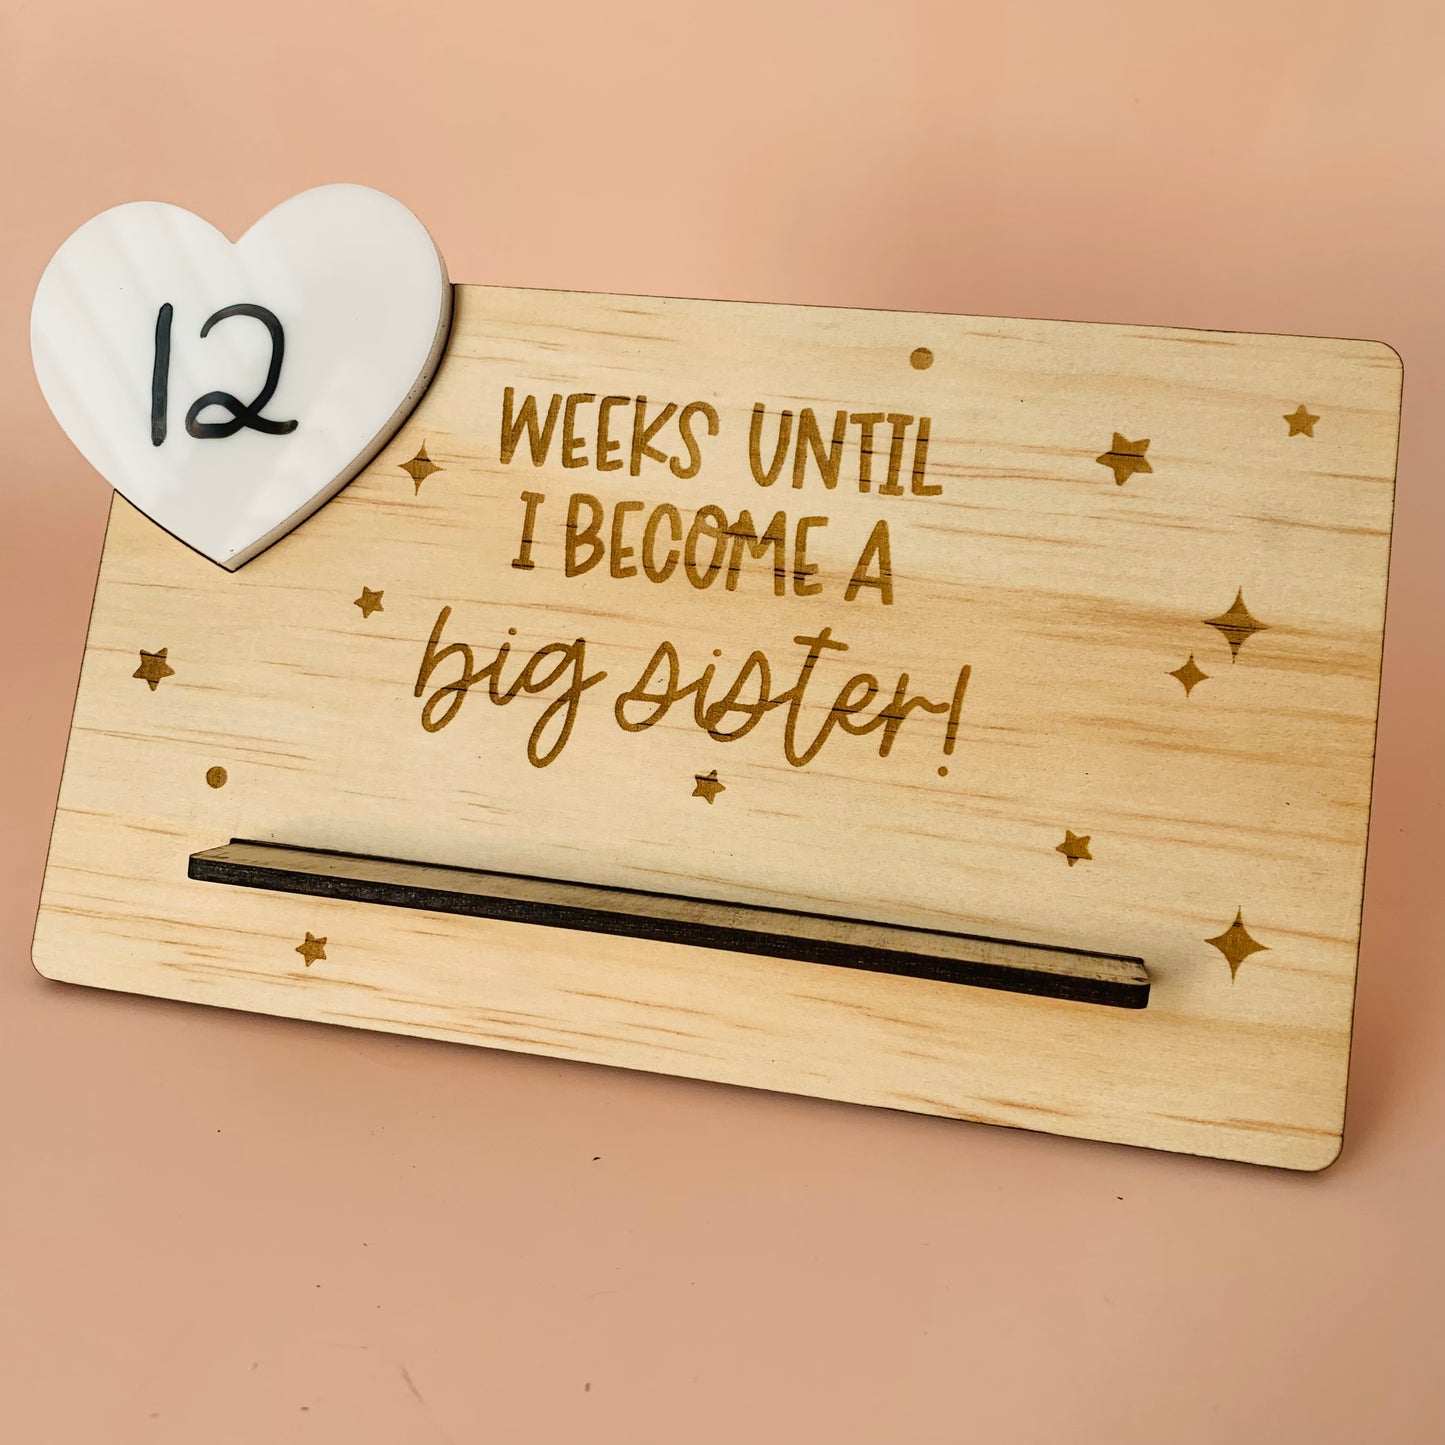 Weeks Until I Become a Big Sister Wooden Countdown